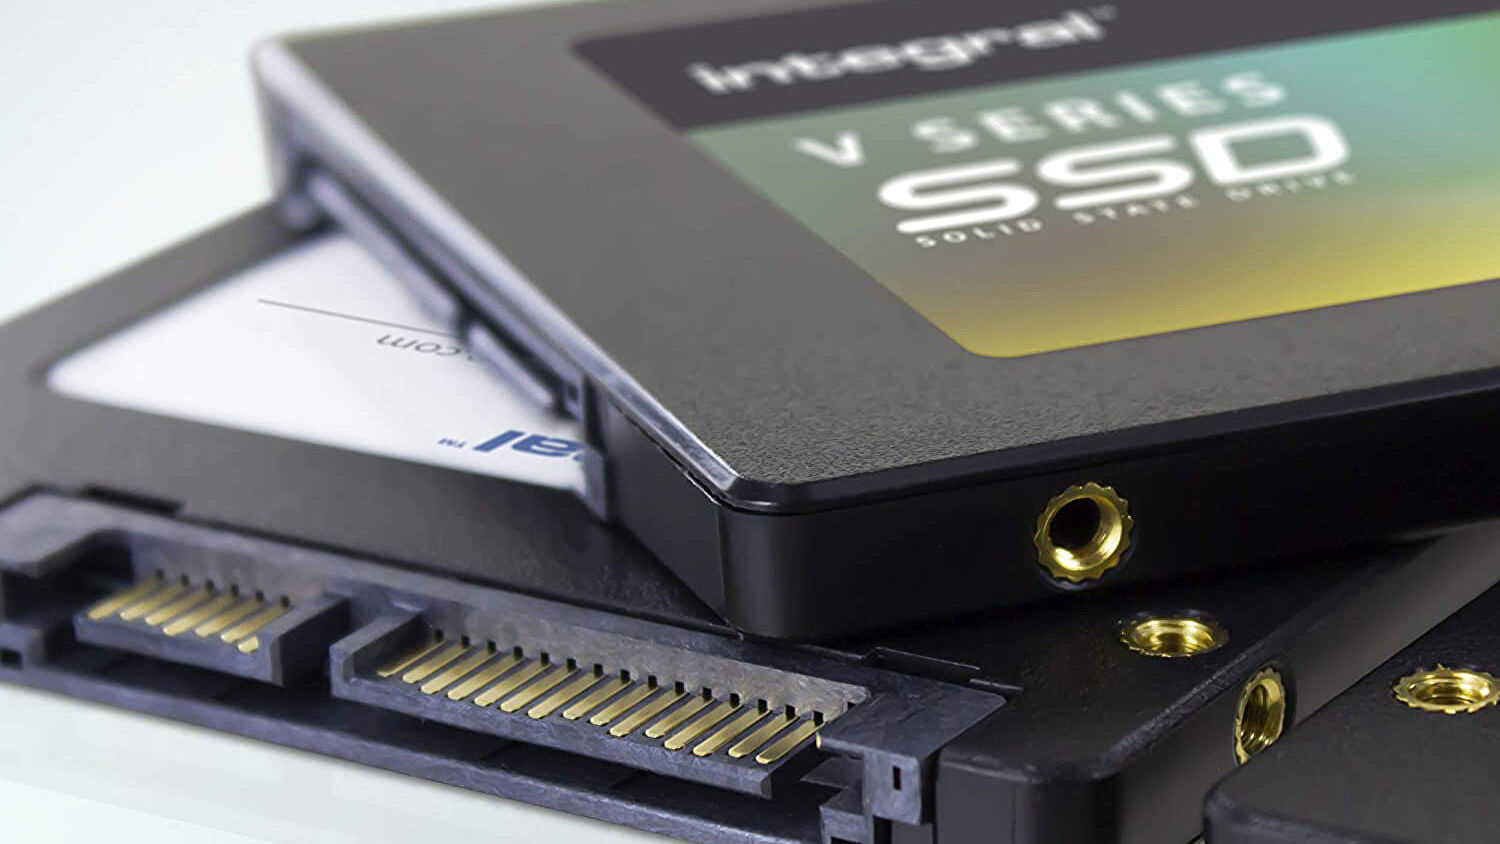 Beef up an old laptop with this 480GB SSD for less than £25